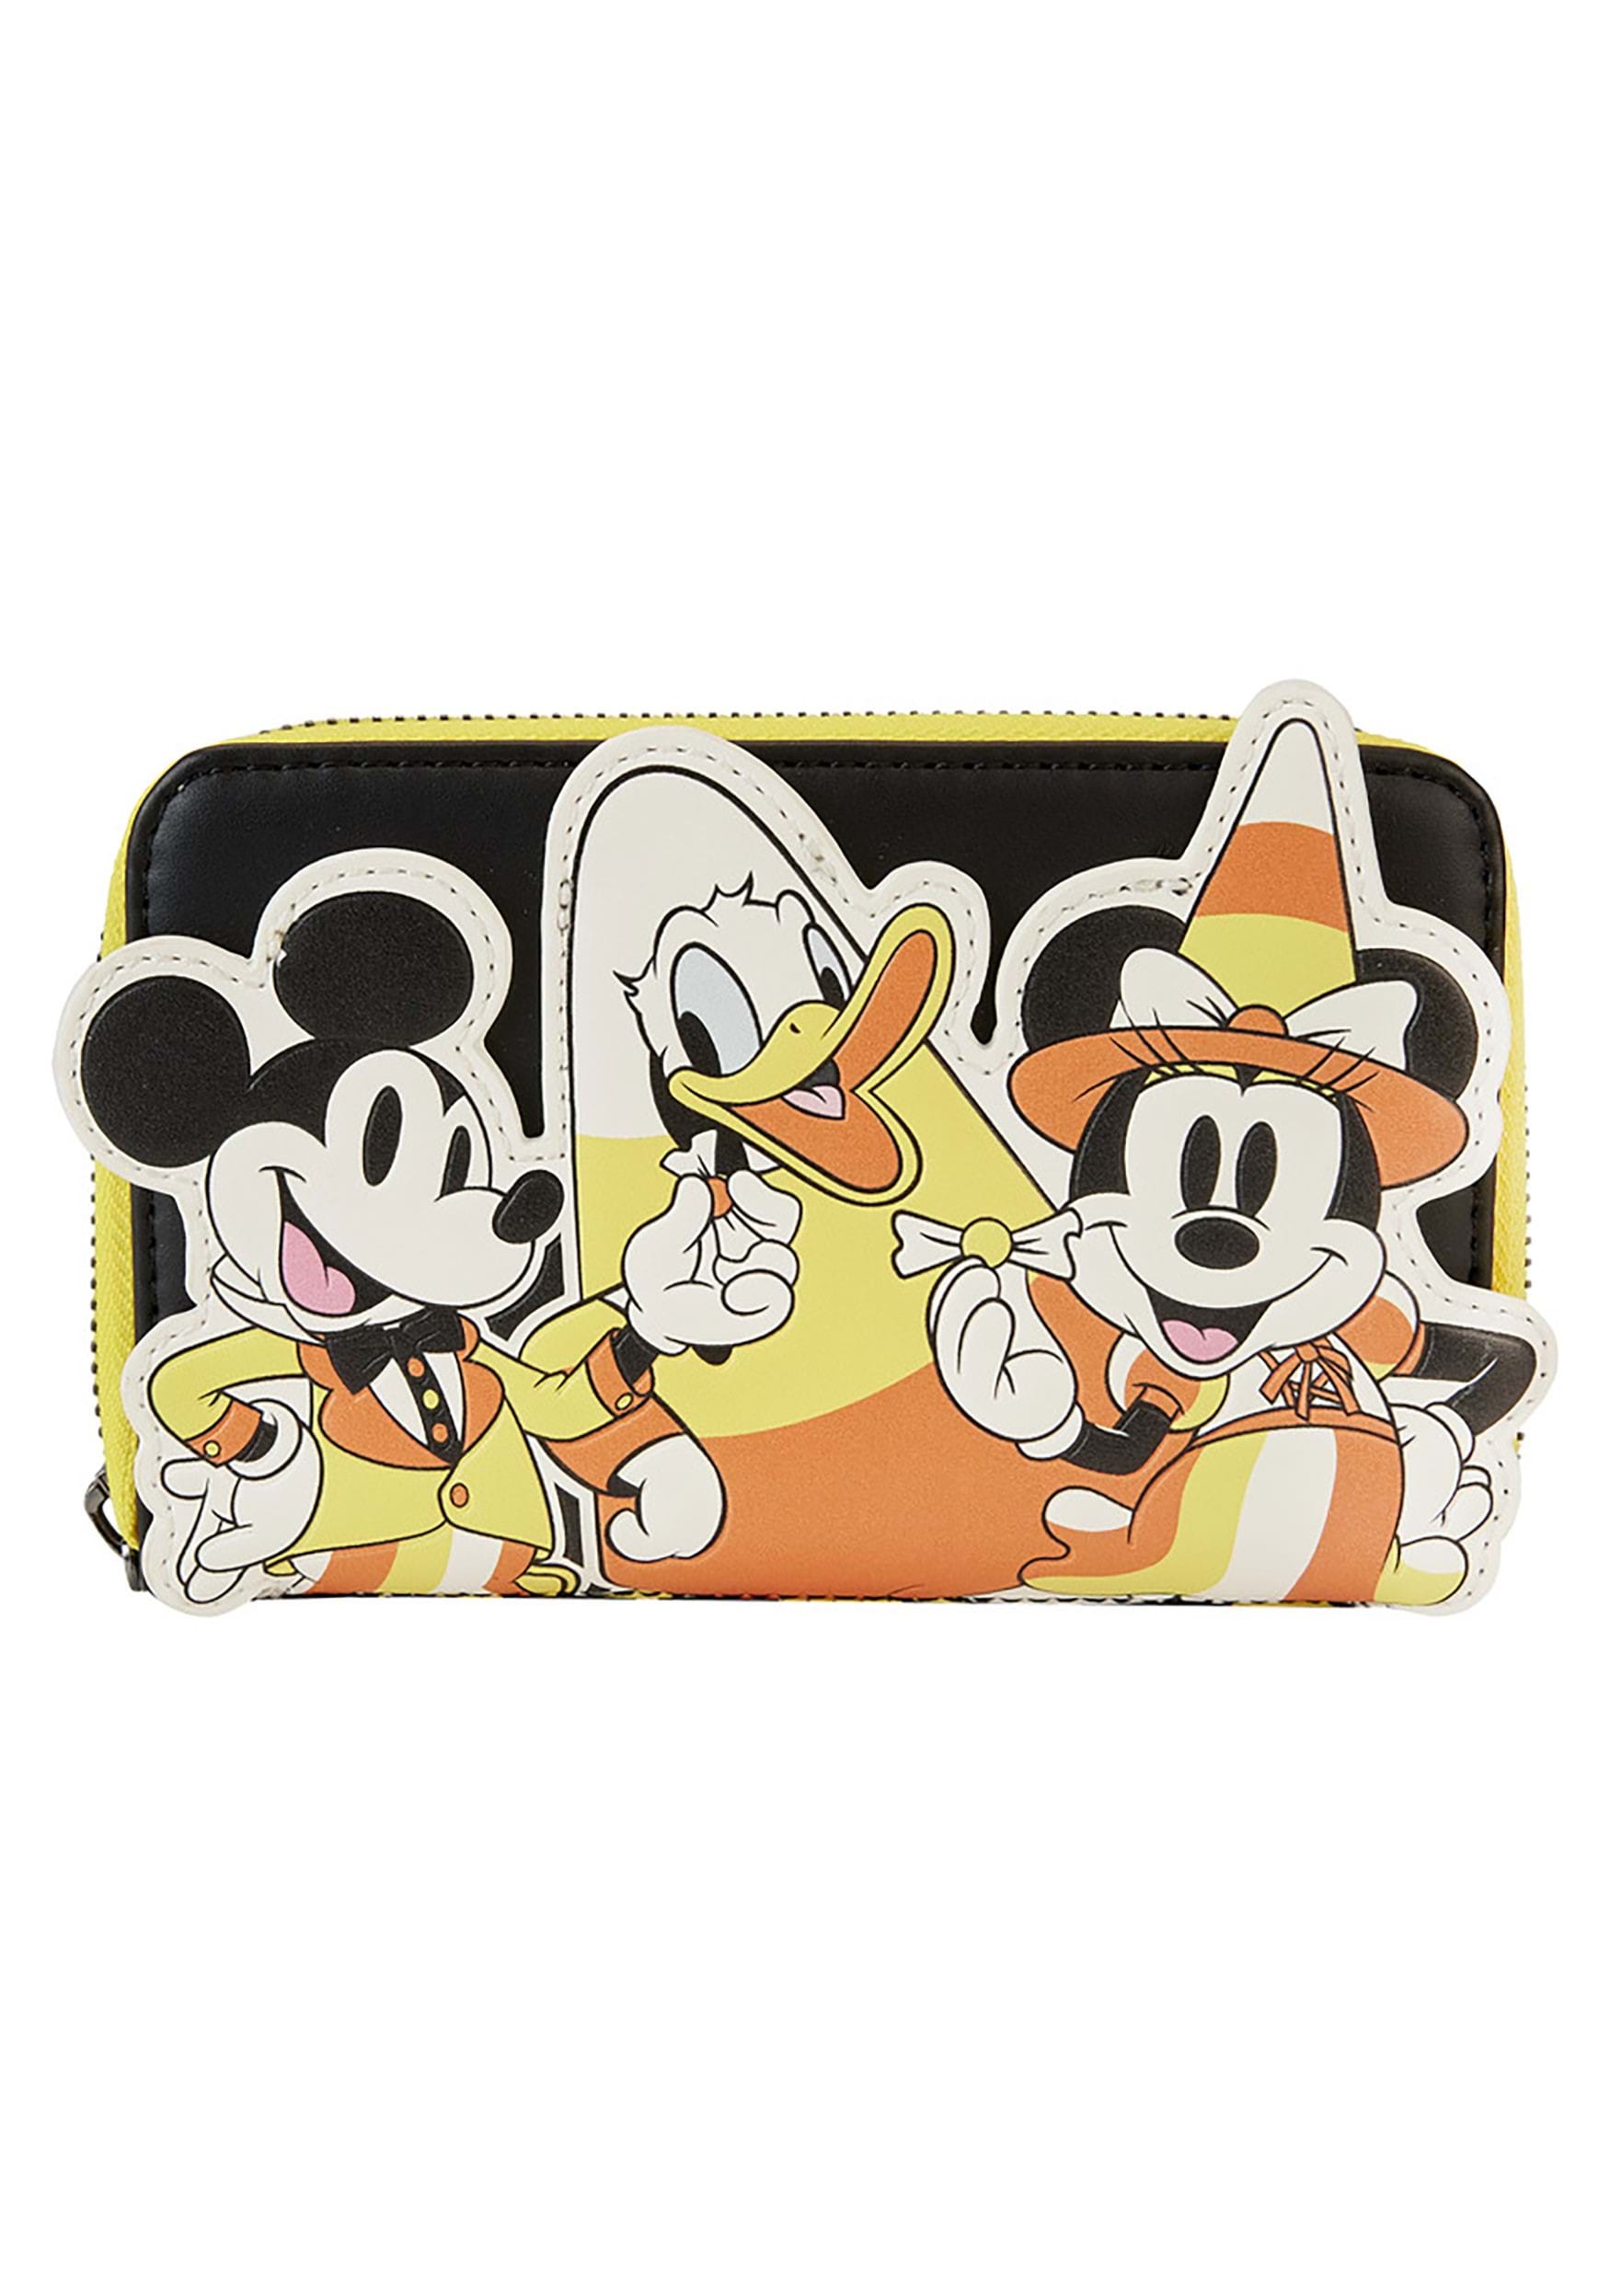 Disney Mickey and Friends Candy Corn Loungefly Zip Around Wallet